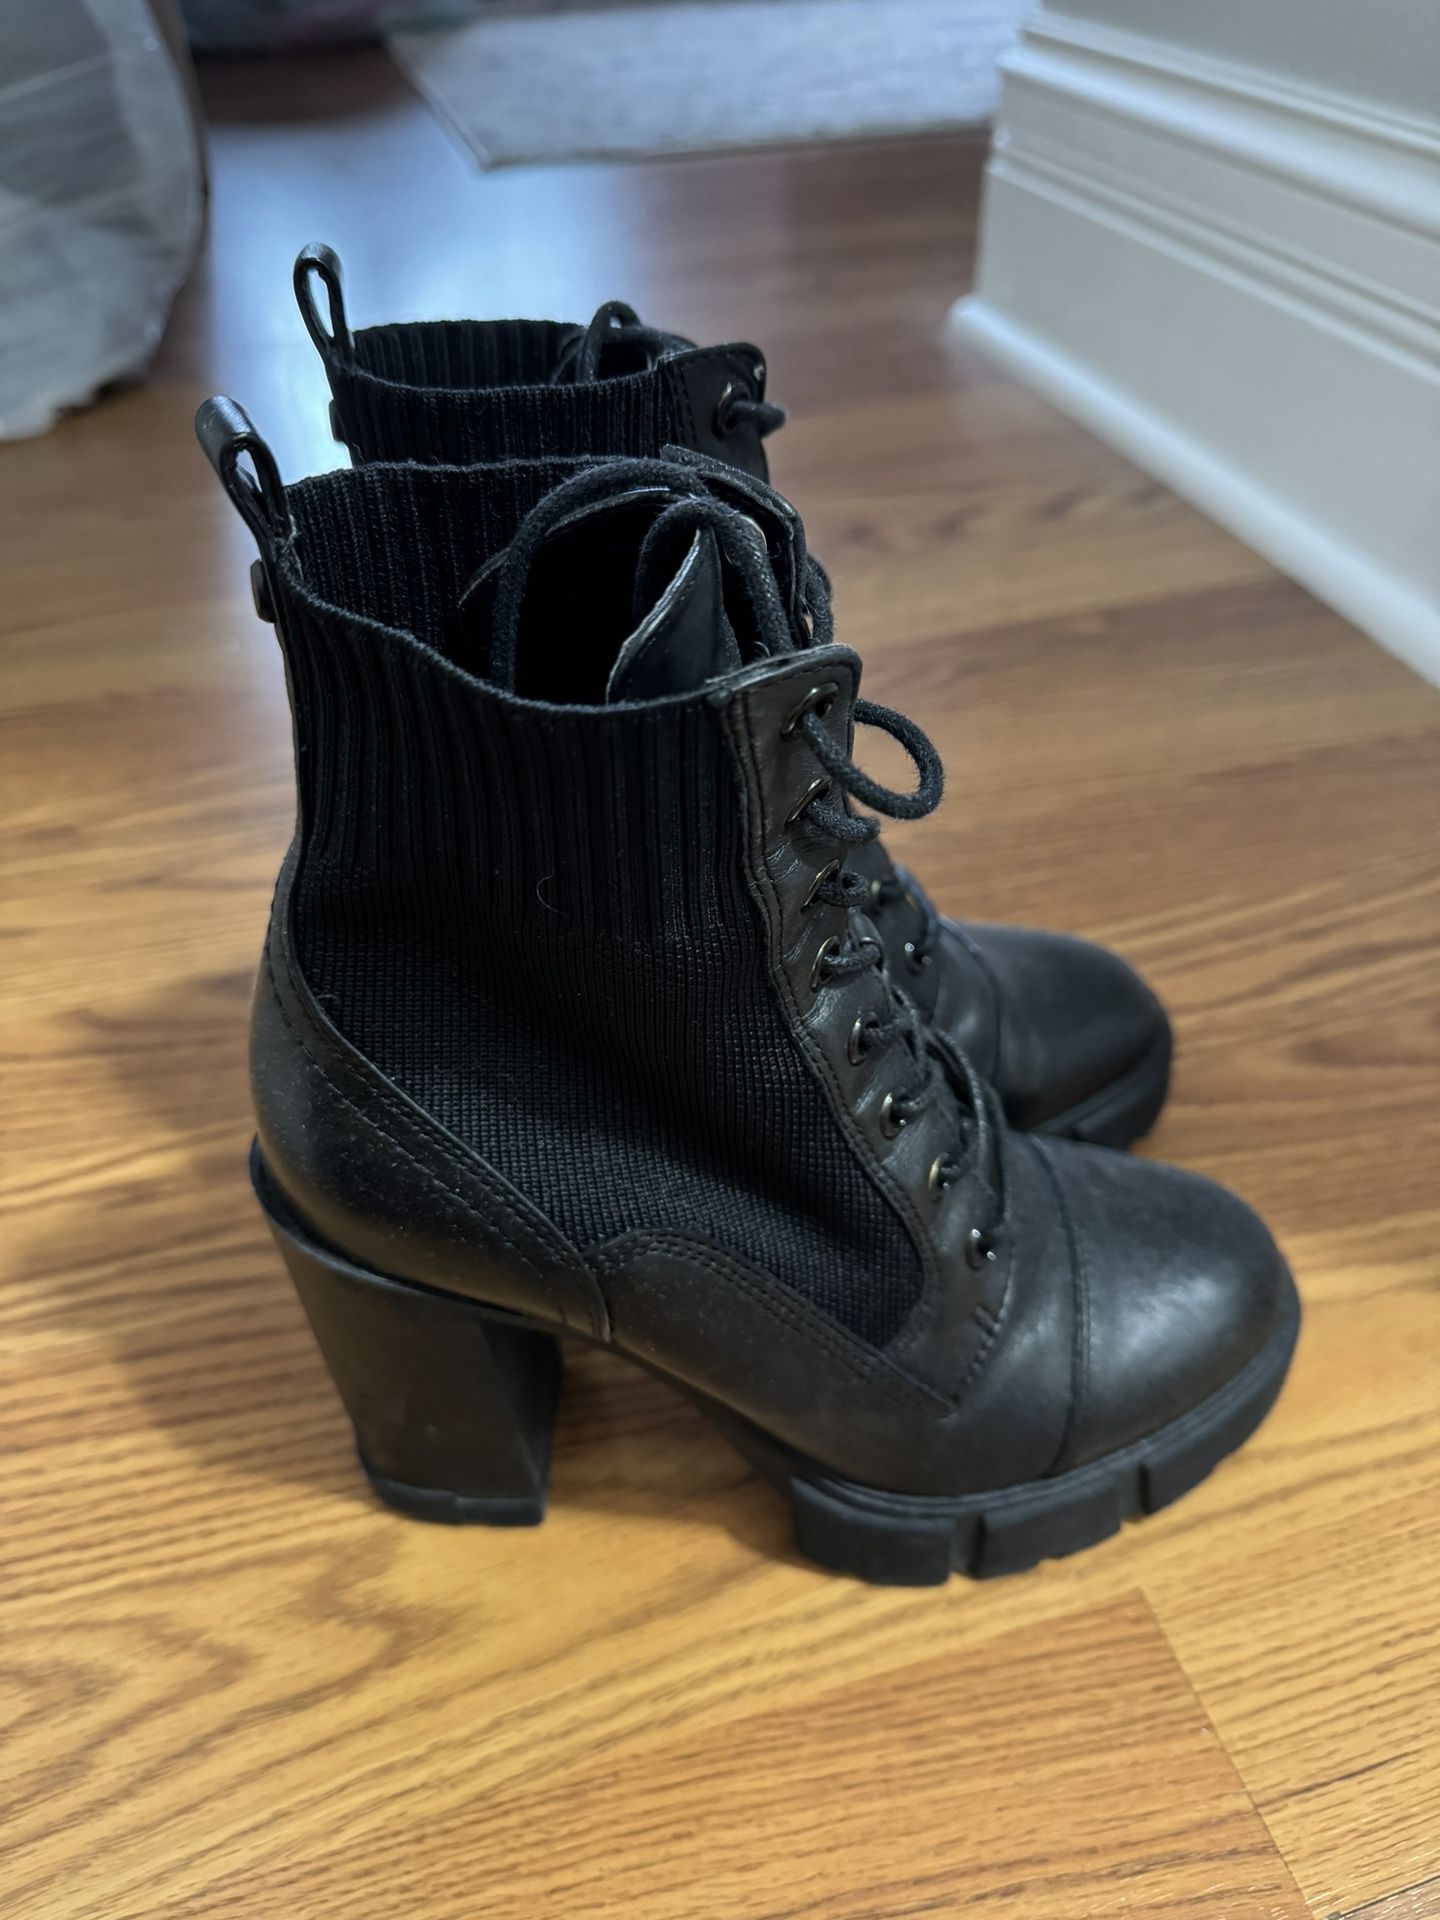 Woman Boots Size 6.5